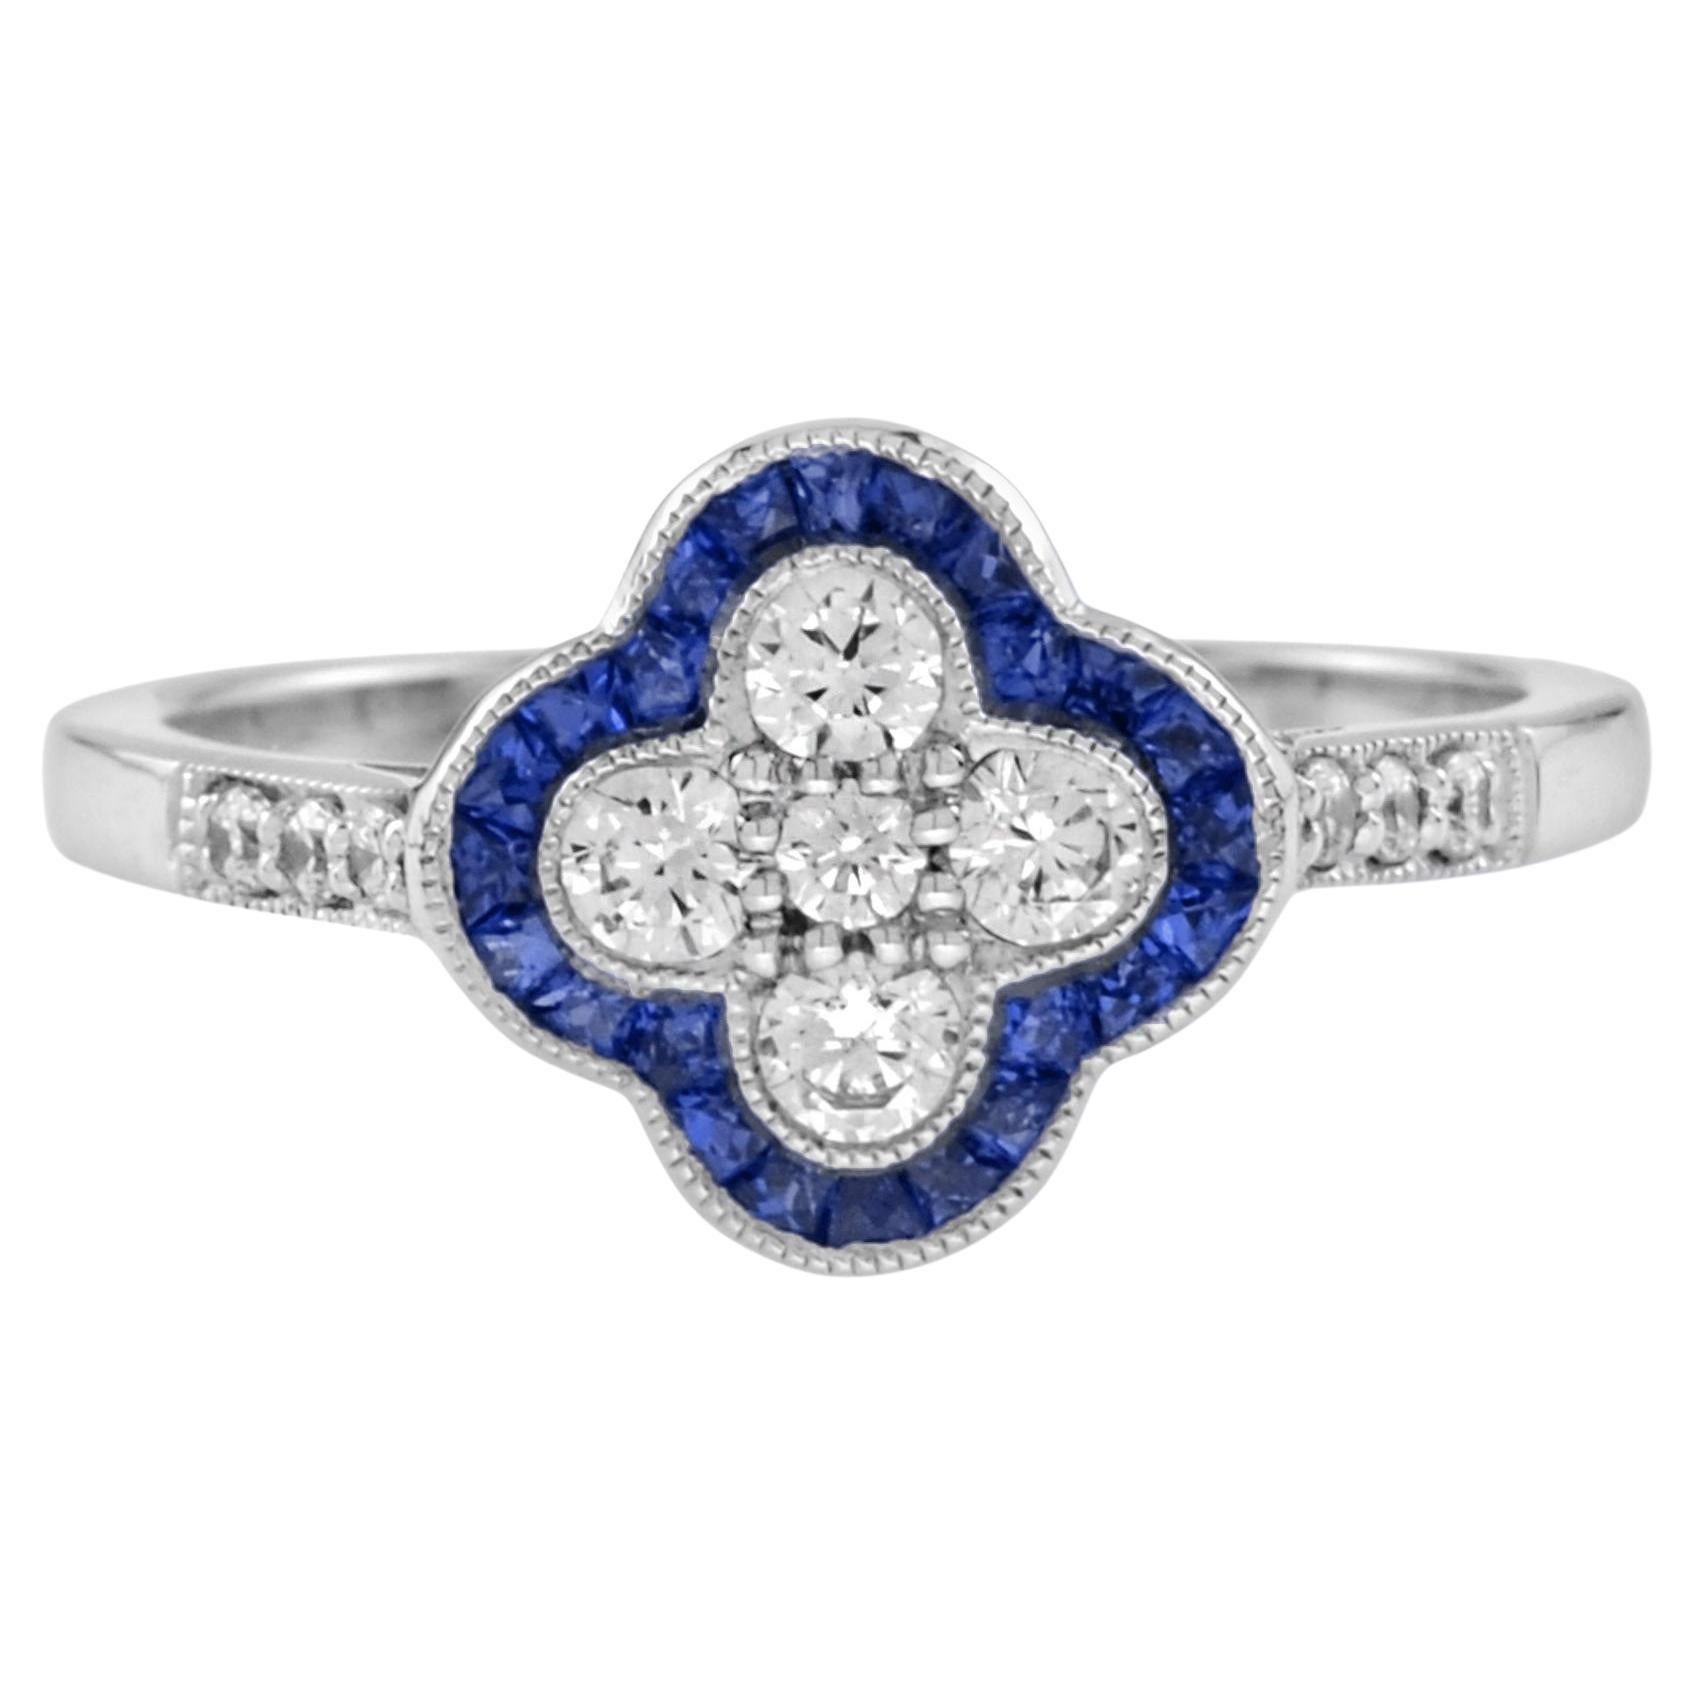 Diamond and Blue Sapphire Art Deco Style Floral Ring in 18K White Gold